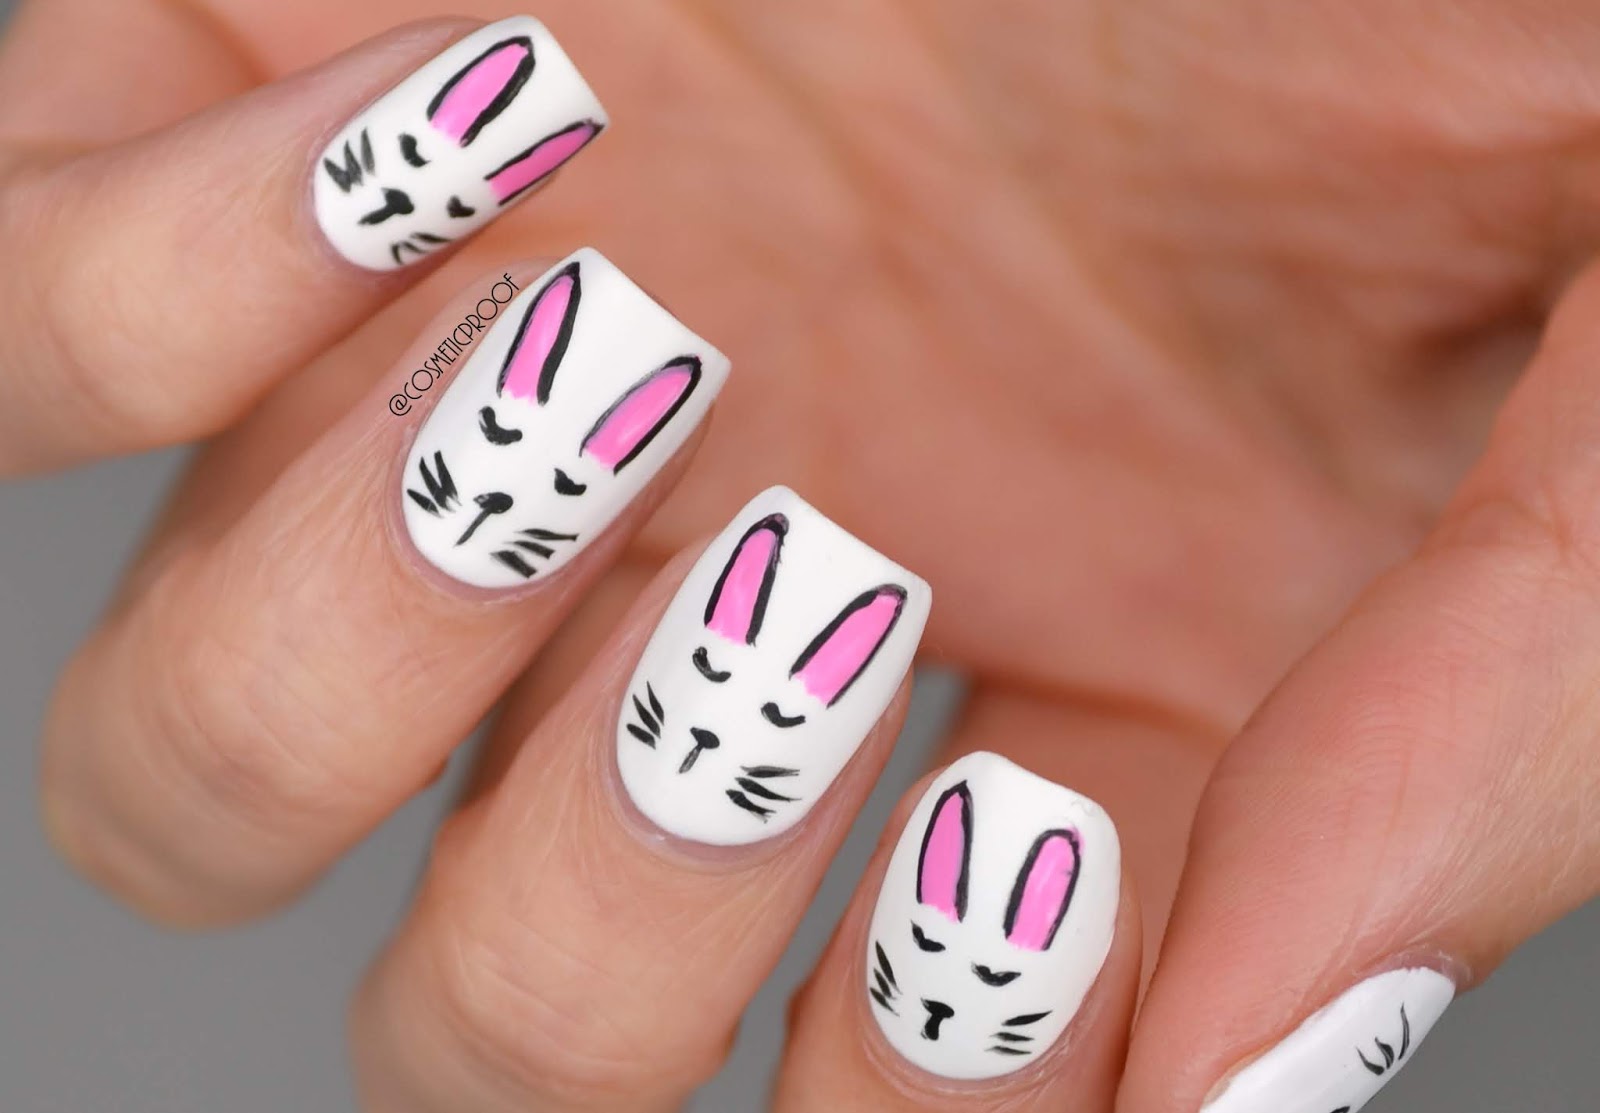 3. Easter Bunny Stiletto Nails - wide 4